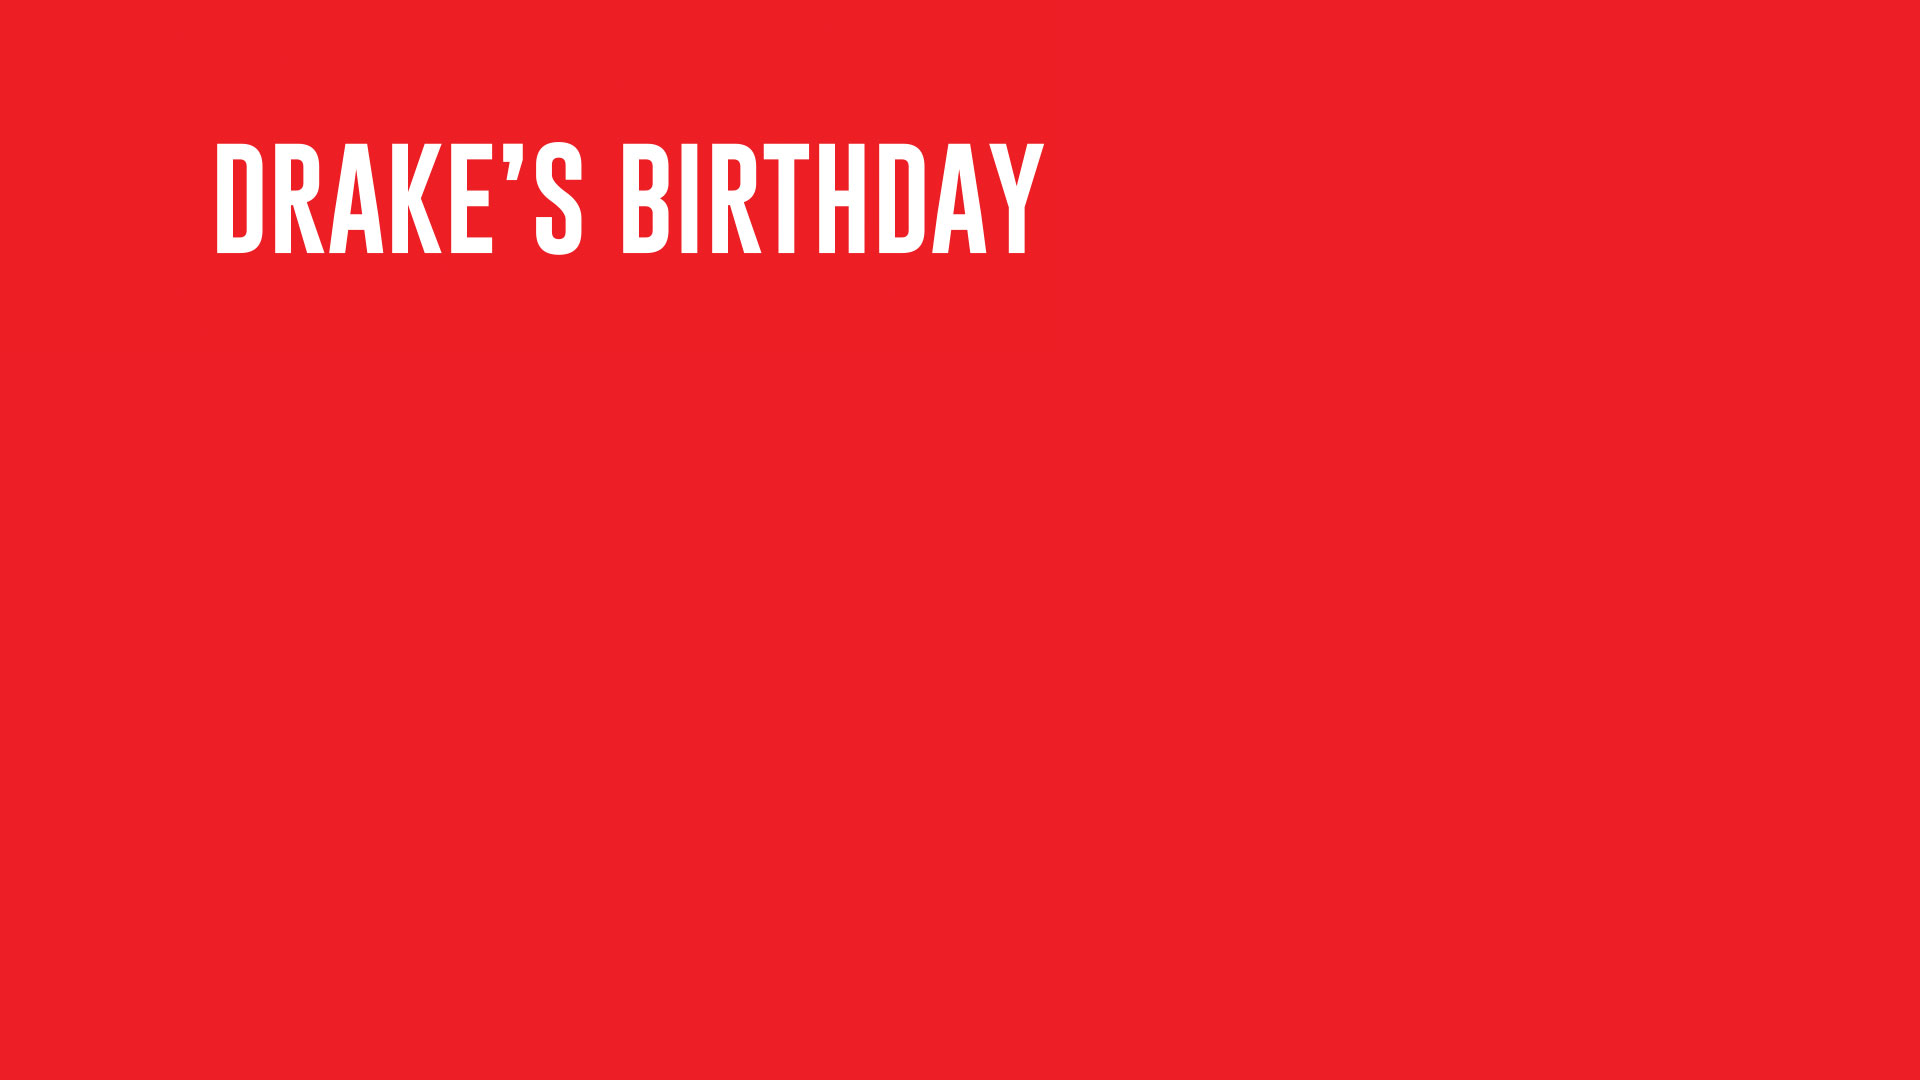 Red background that says "Drake's Birthday" in white text